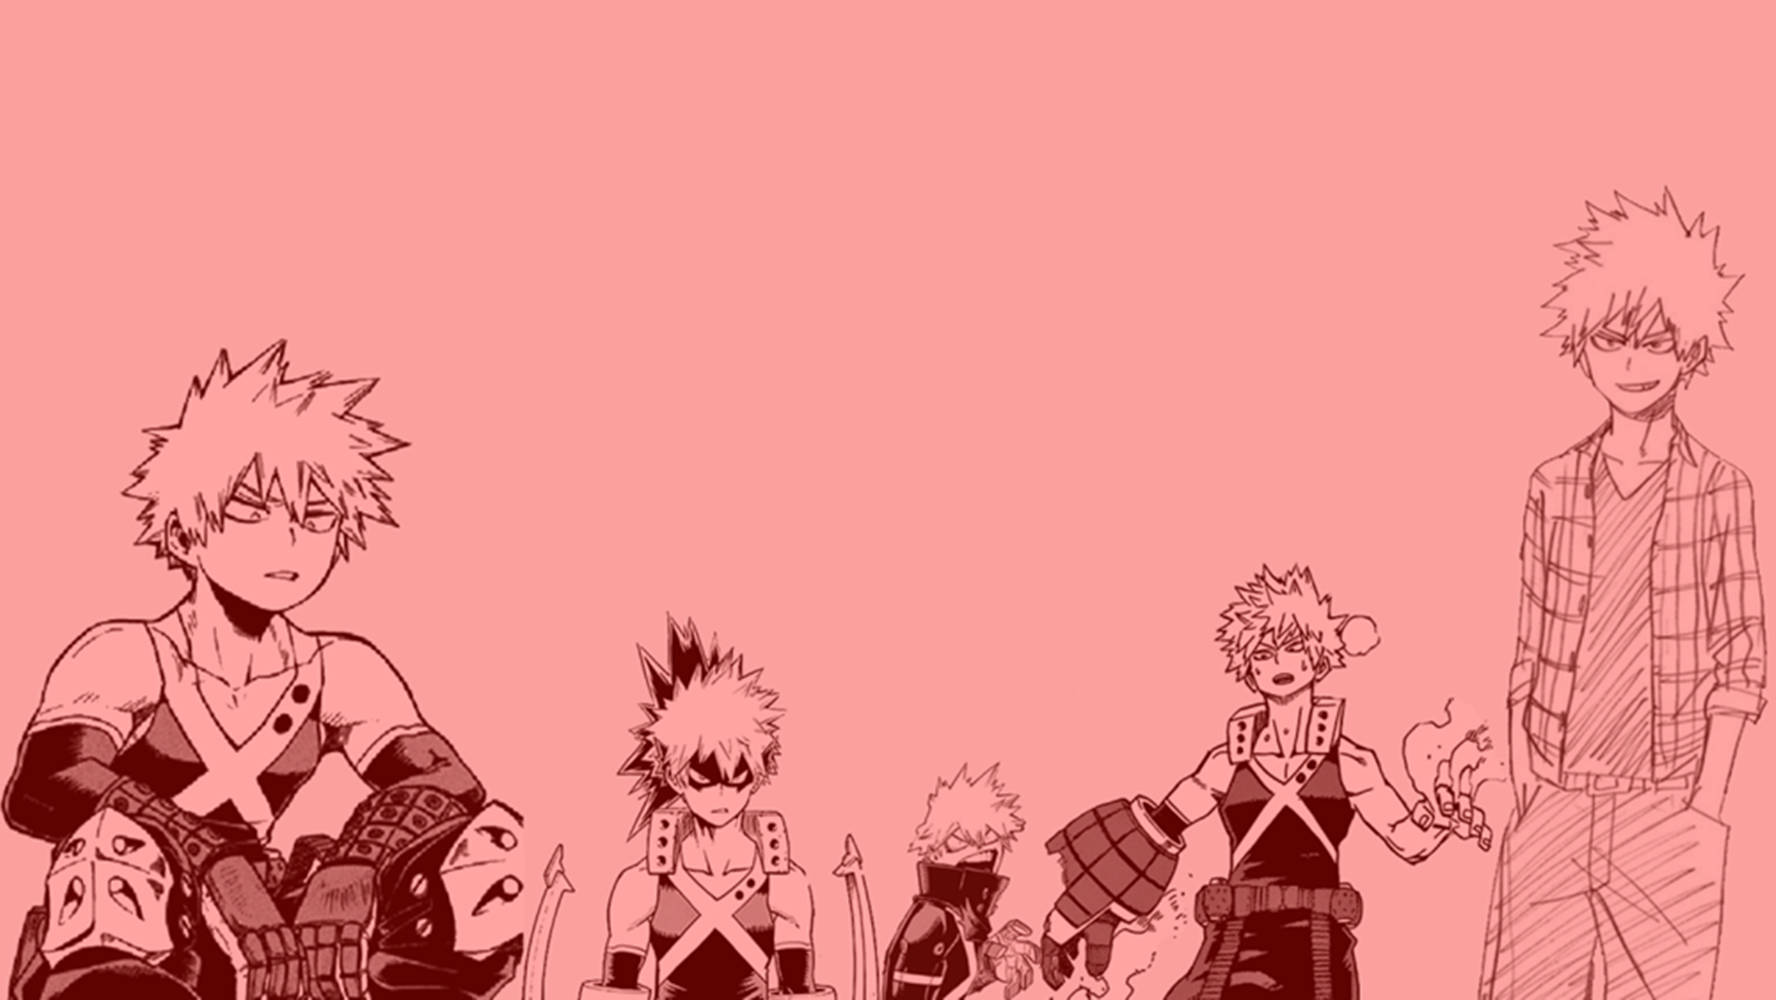 A Sweet And Smiling Bakugou Background